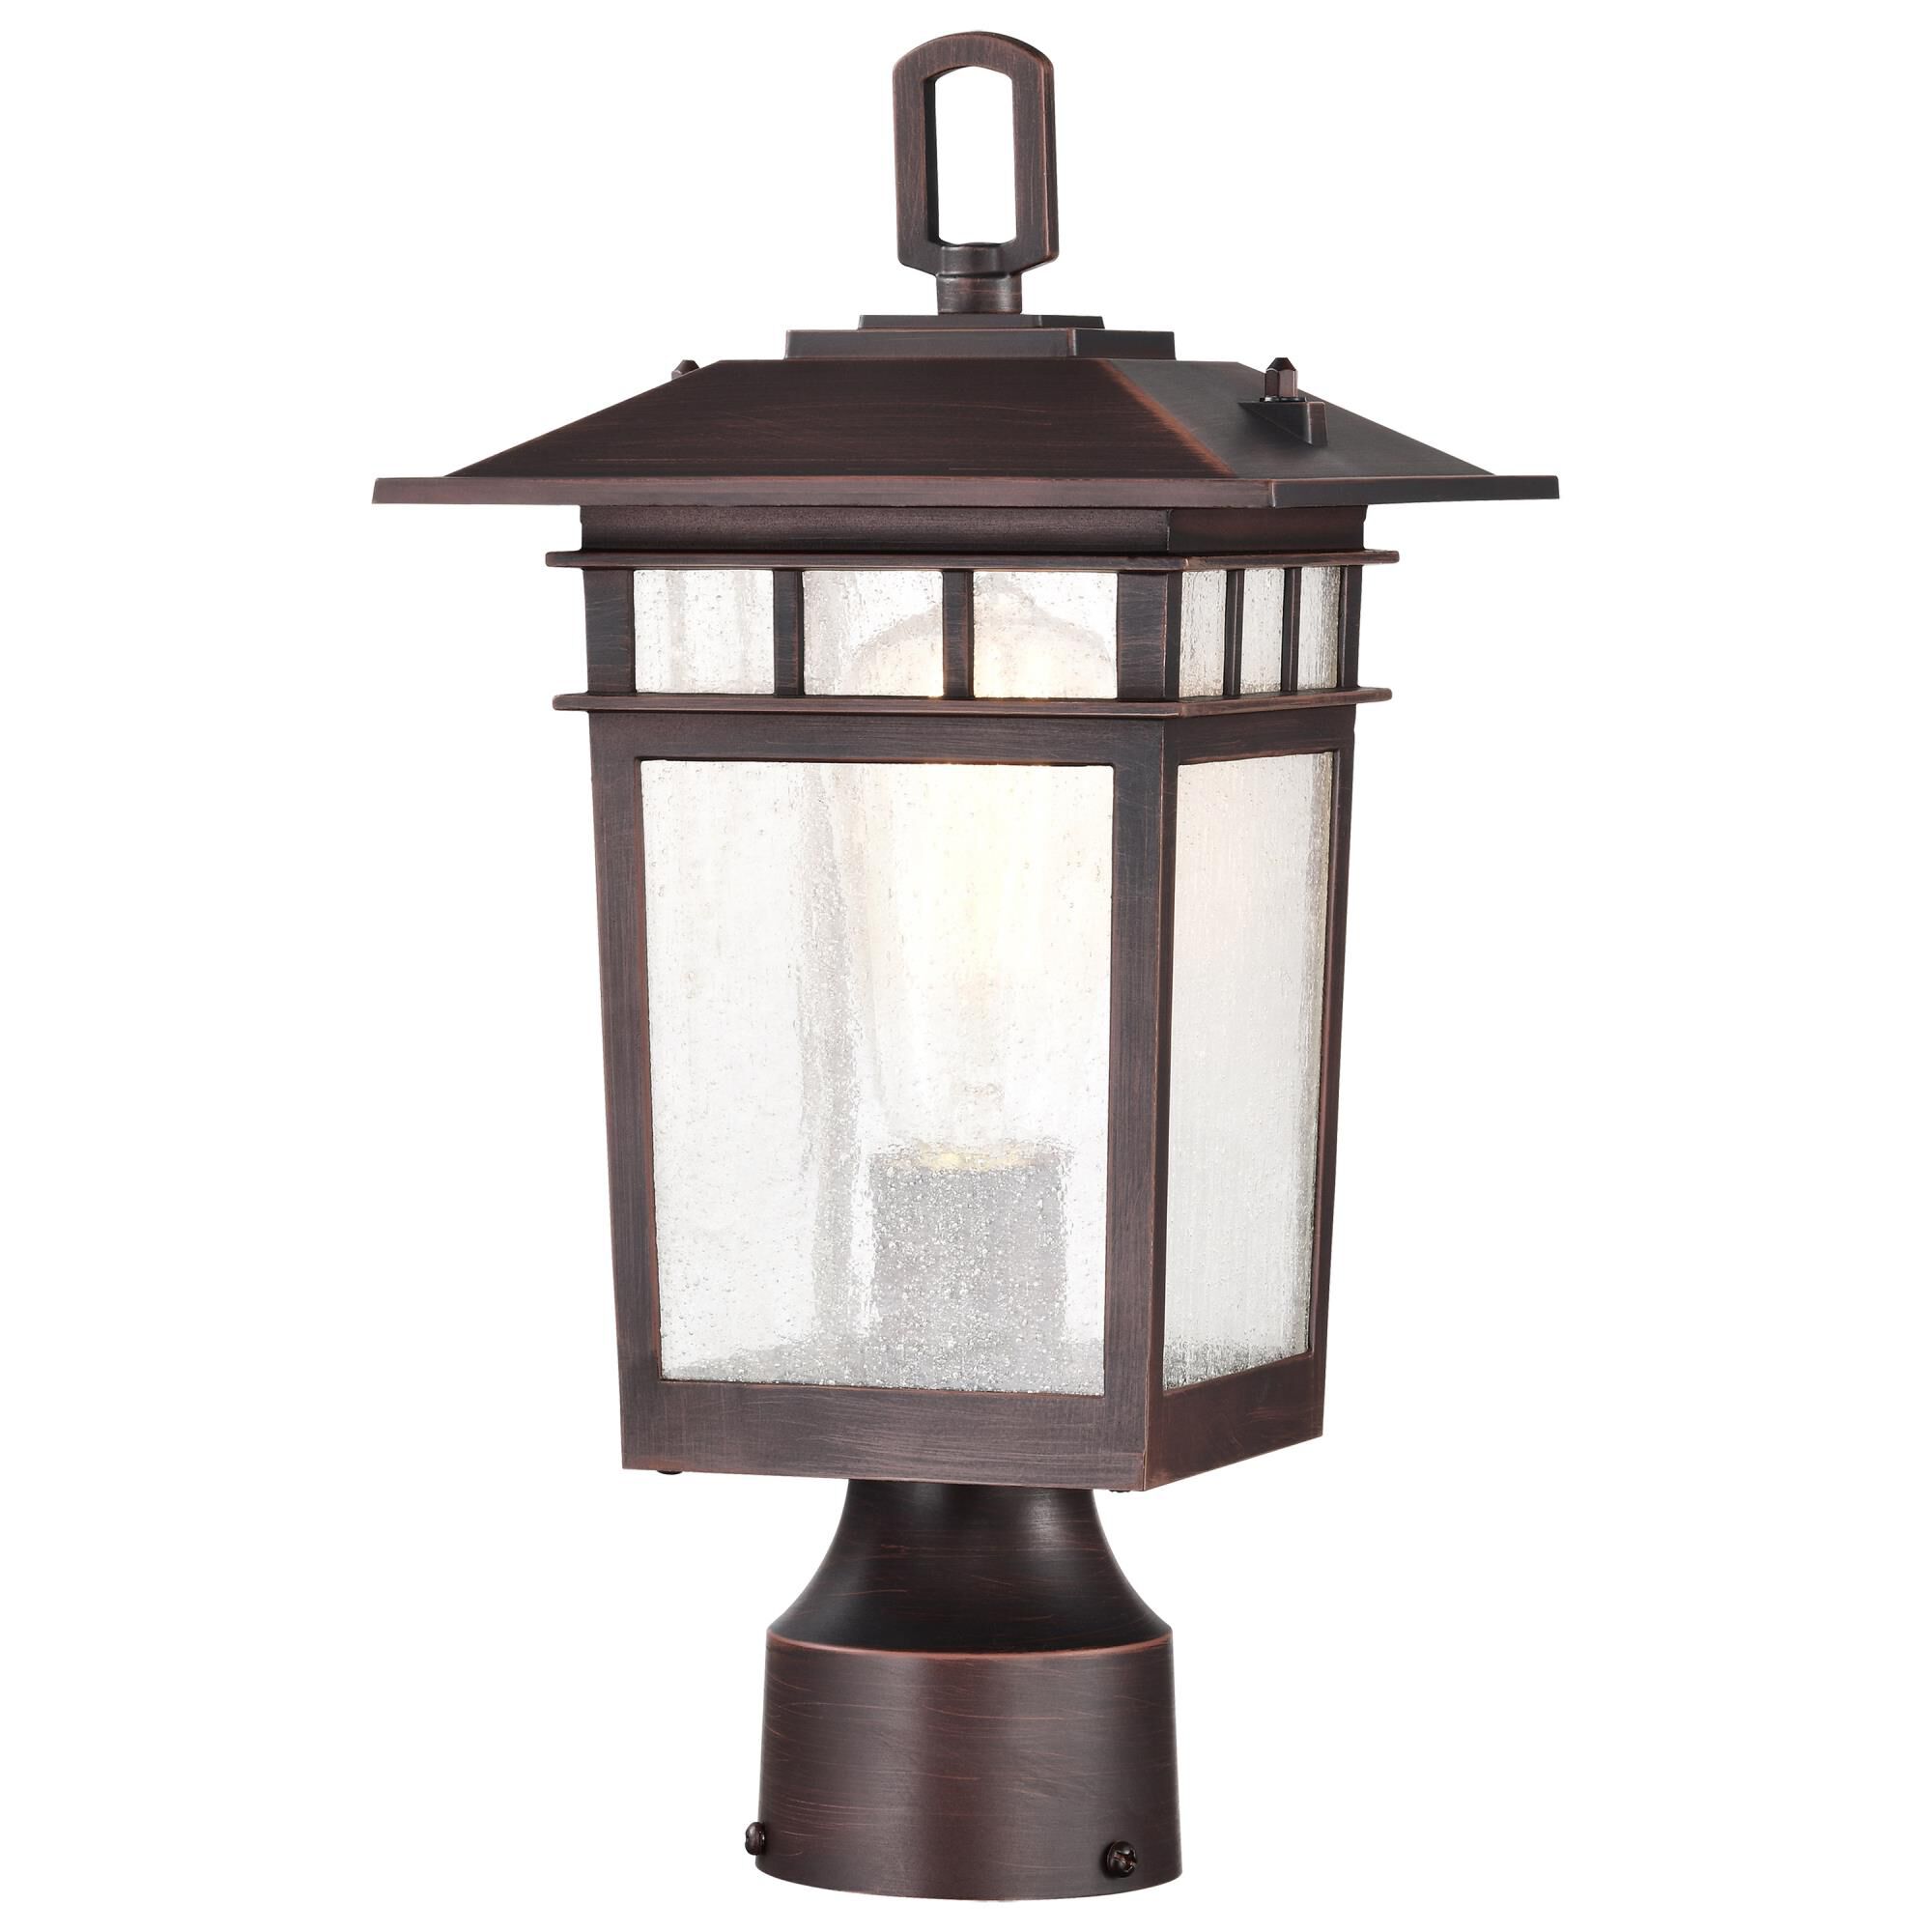 Photos - Floodlight / Street Light Nuvo Lighting Cove Neck 13 Inch Tall Outdoor Post Lamp Cove Neck - 60-5955